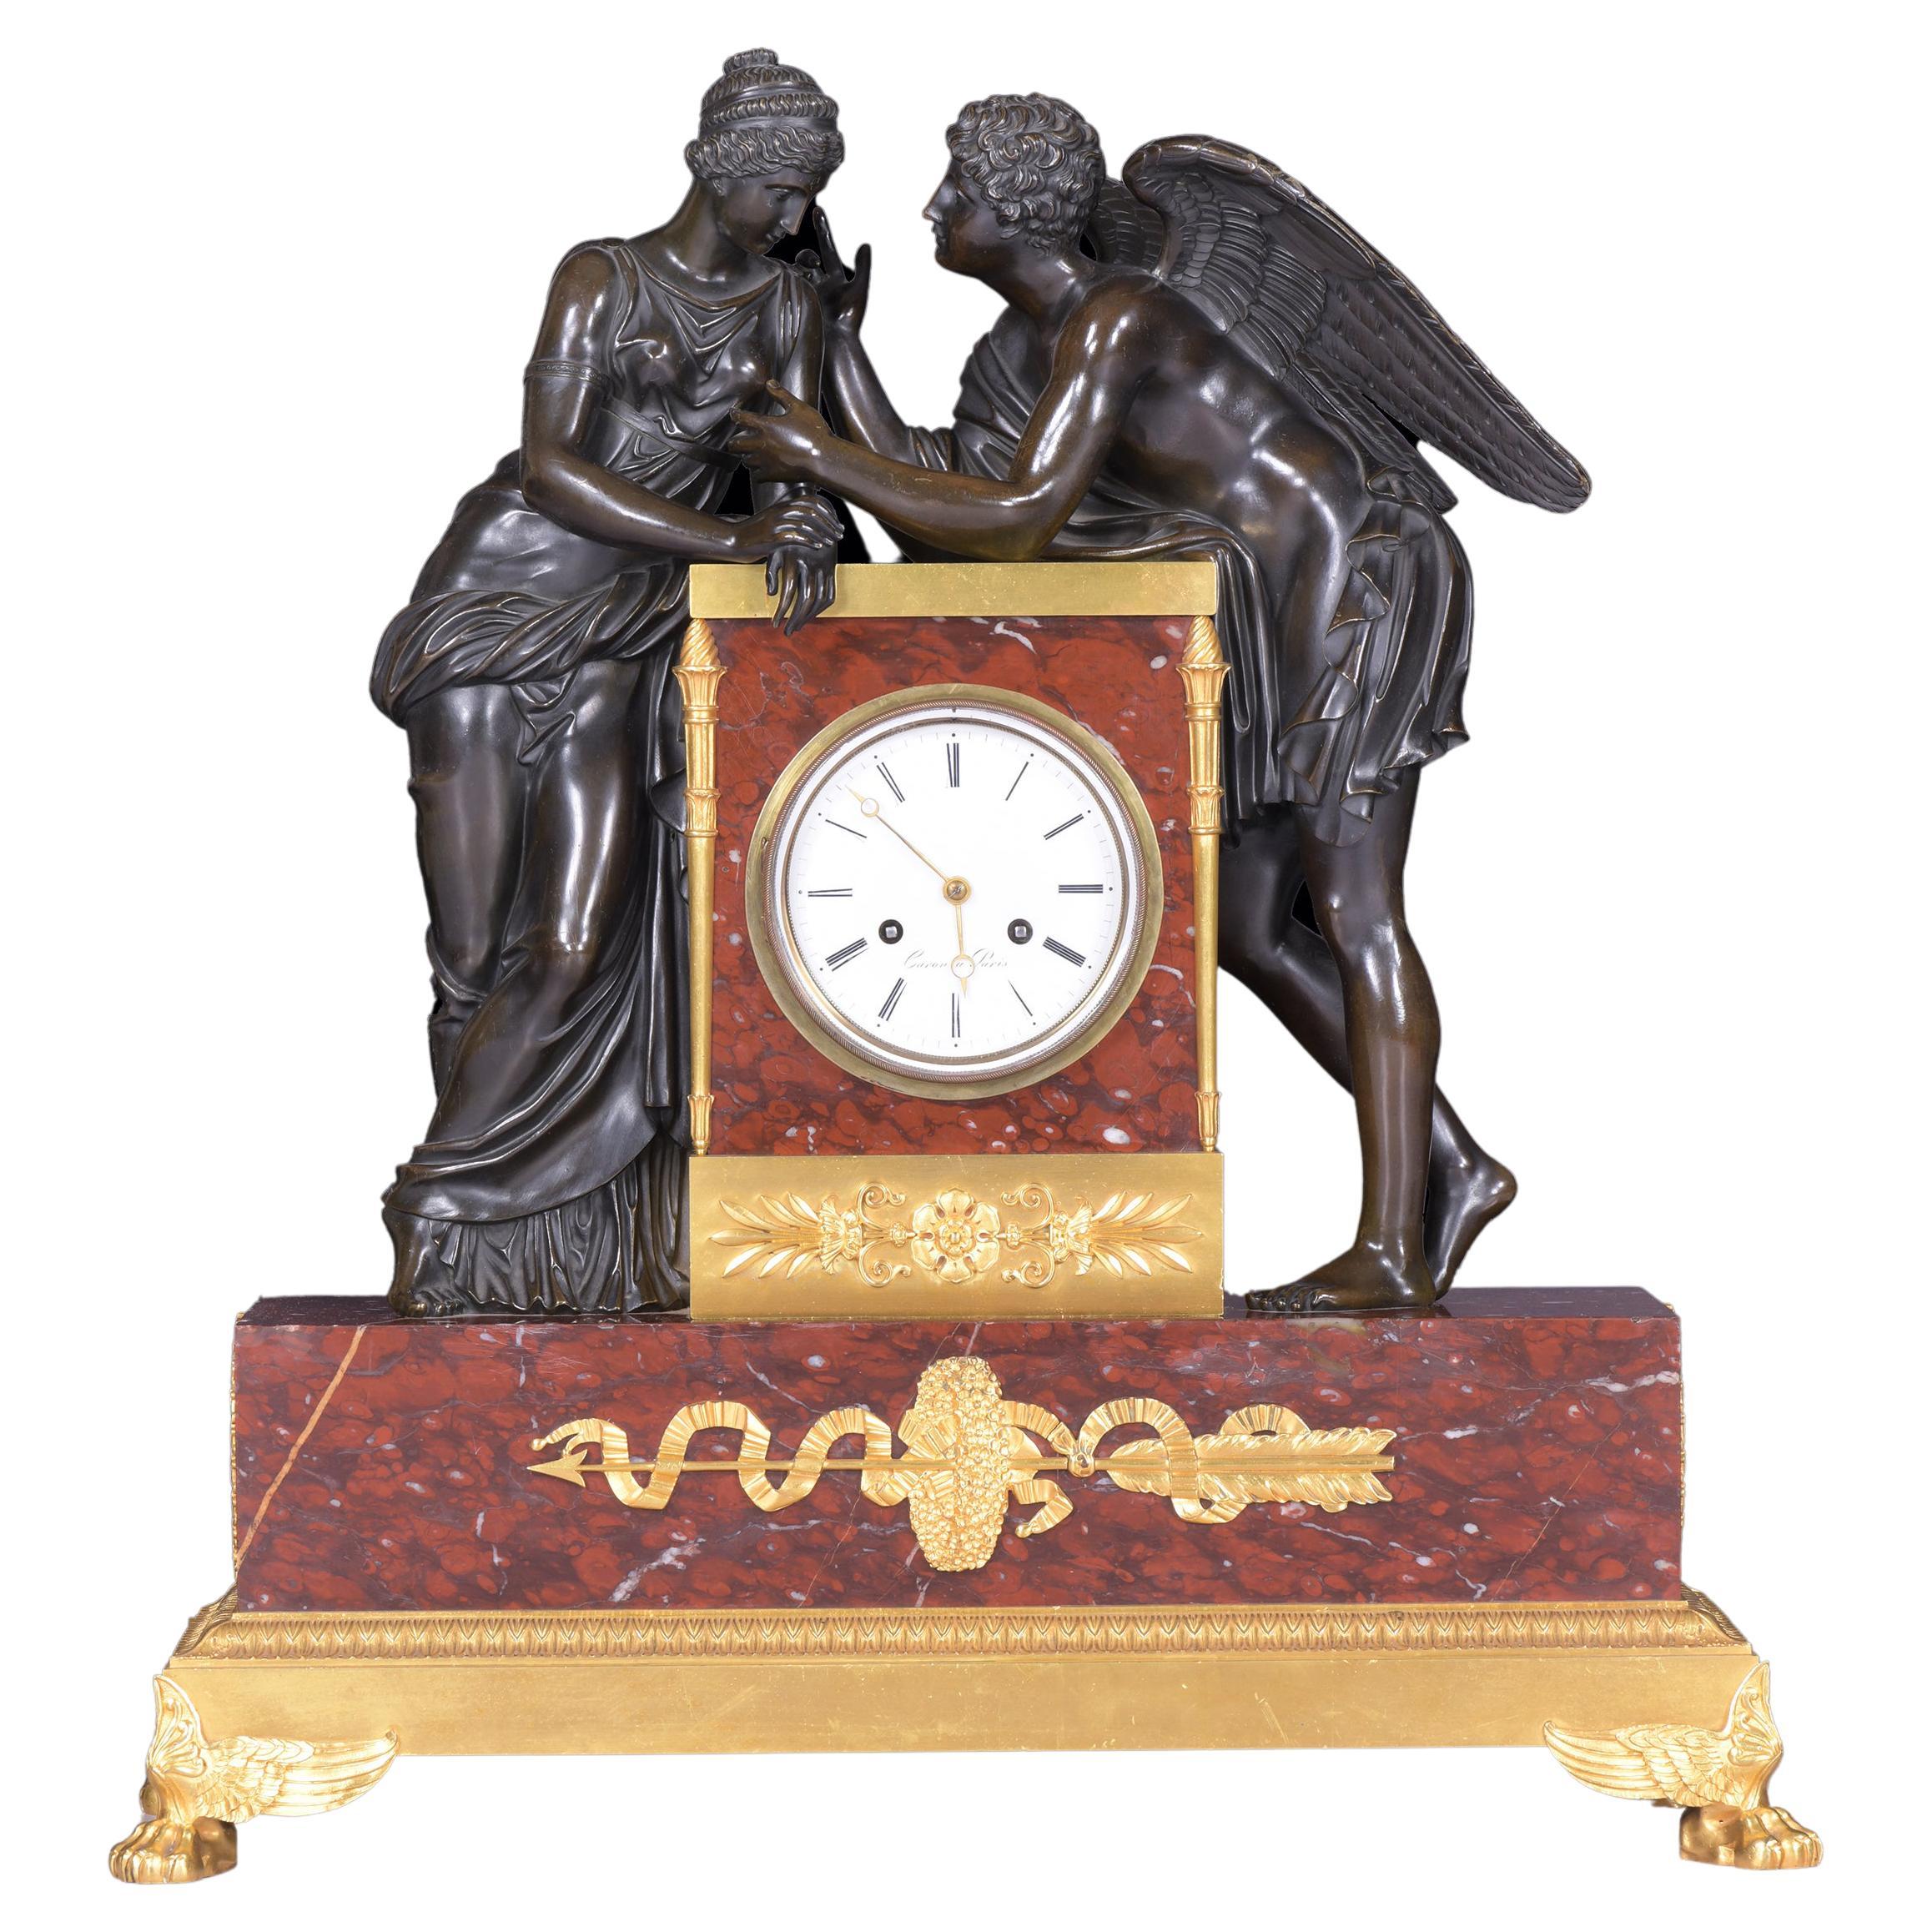 19th Century French Mantle Clock Signed Caron a Paris Depicting Psyche & Cupid